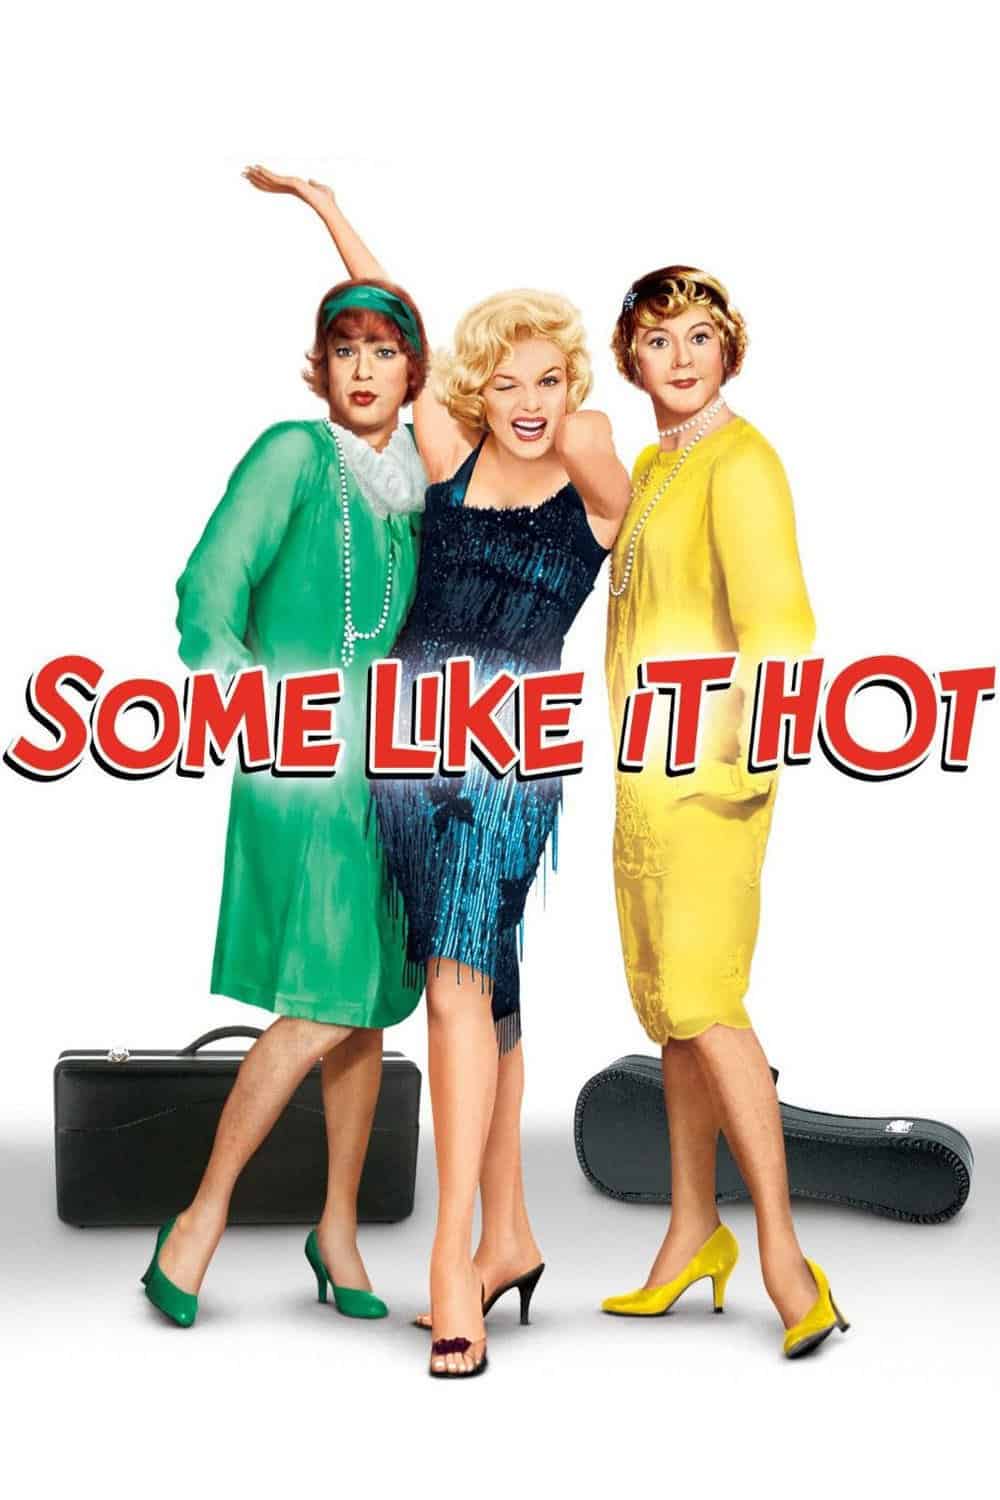 Some Like It Hot, 1959 